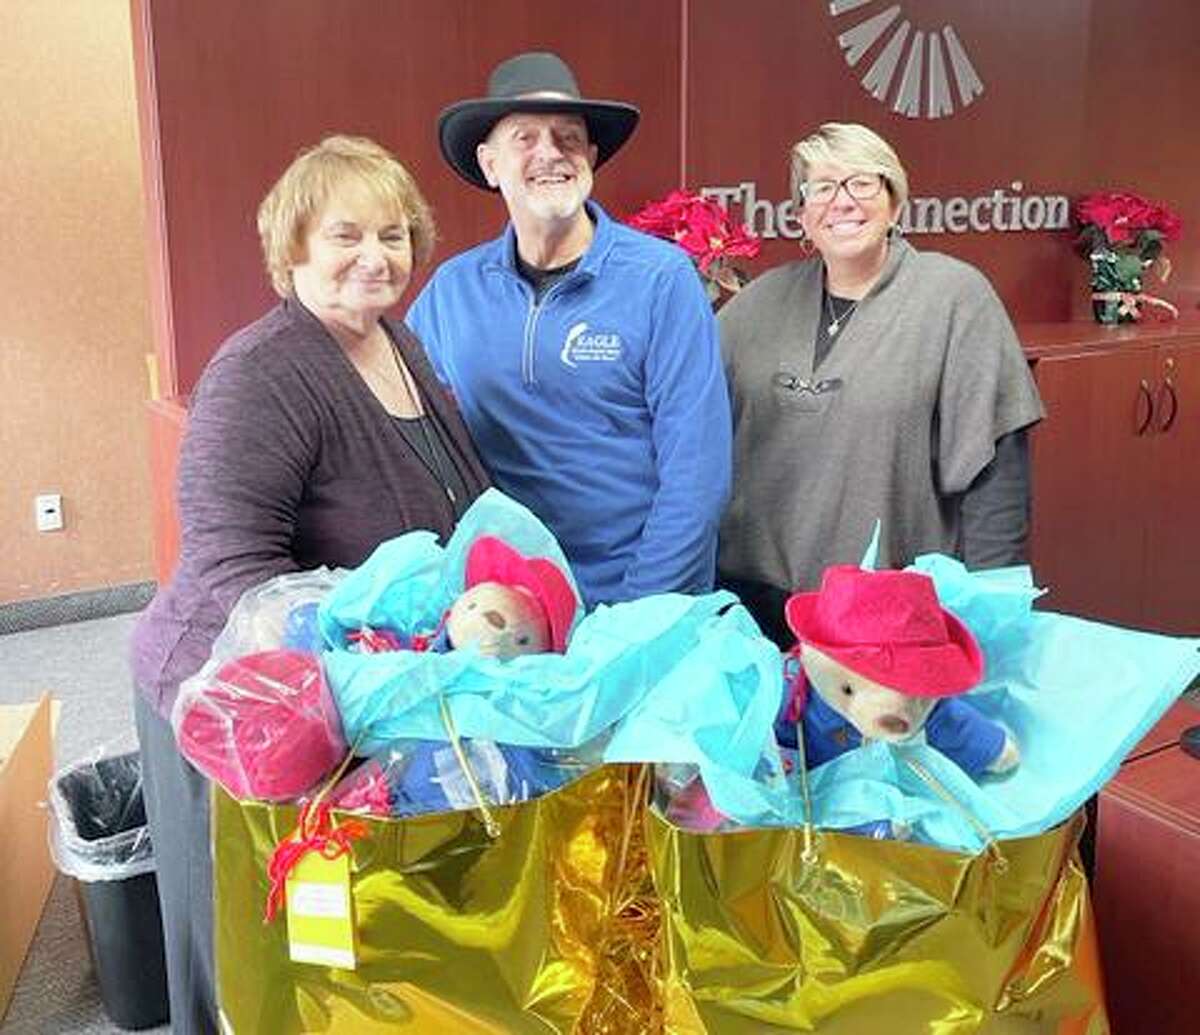 New Haven Middlesex Association of Realtors Sponsor Ron Rivard of Eagle Home Inspections delivers gifts for the children at The Connection in Middletown.